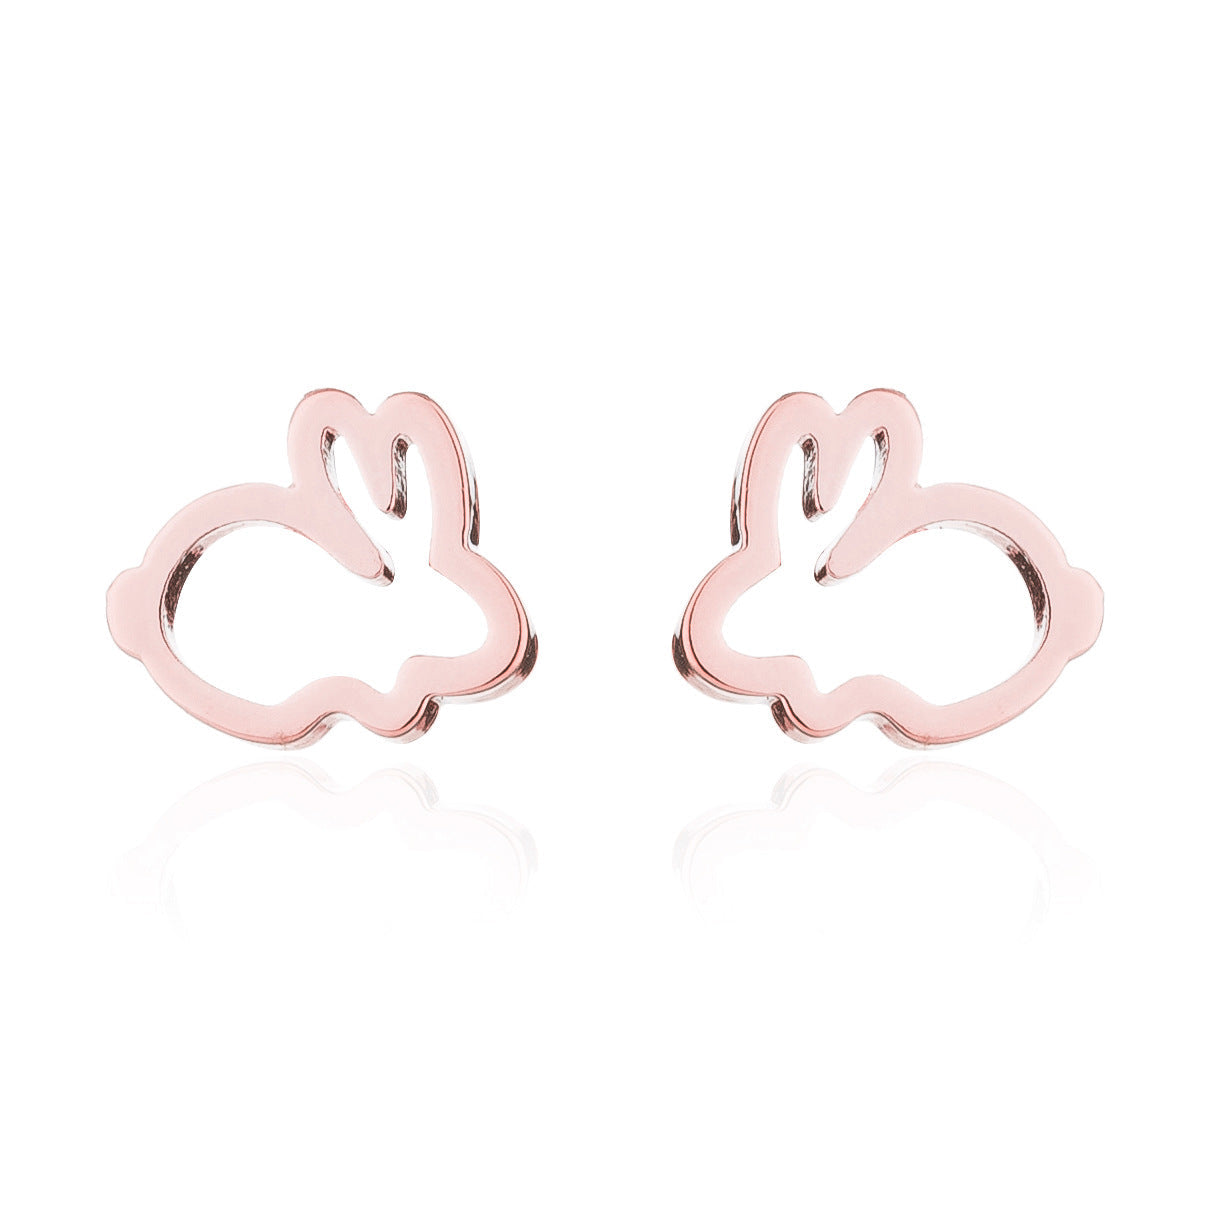 Baby and Children's Earrings:  Surgical Steel, Gold IP Open Bunny Rabbits